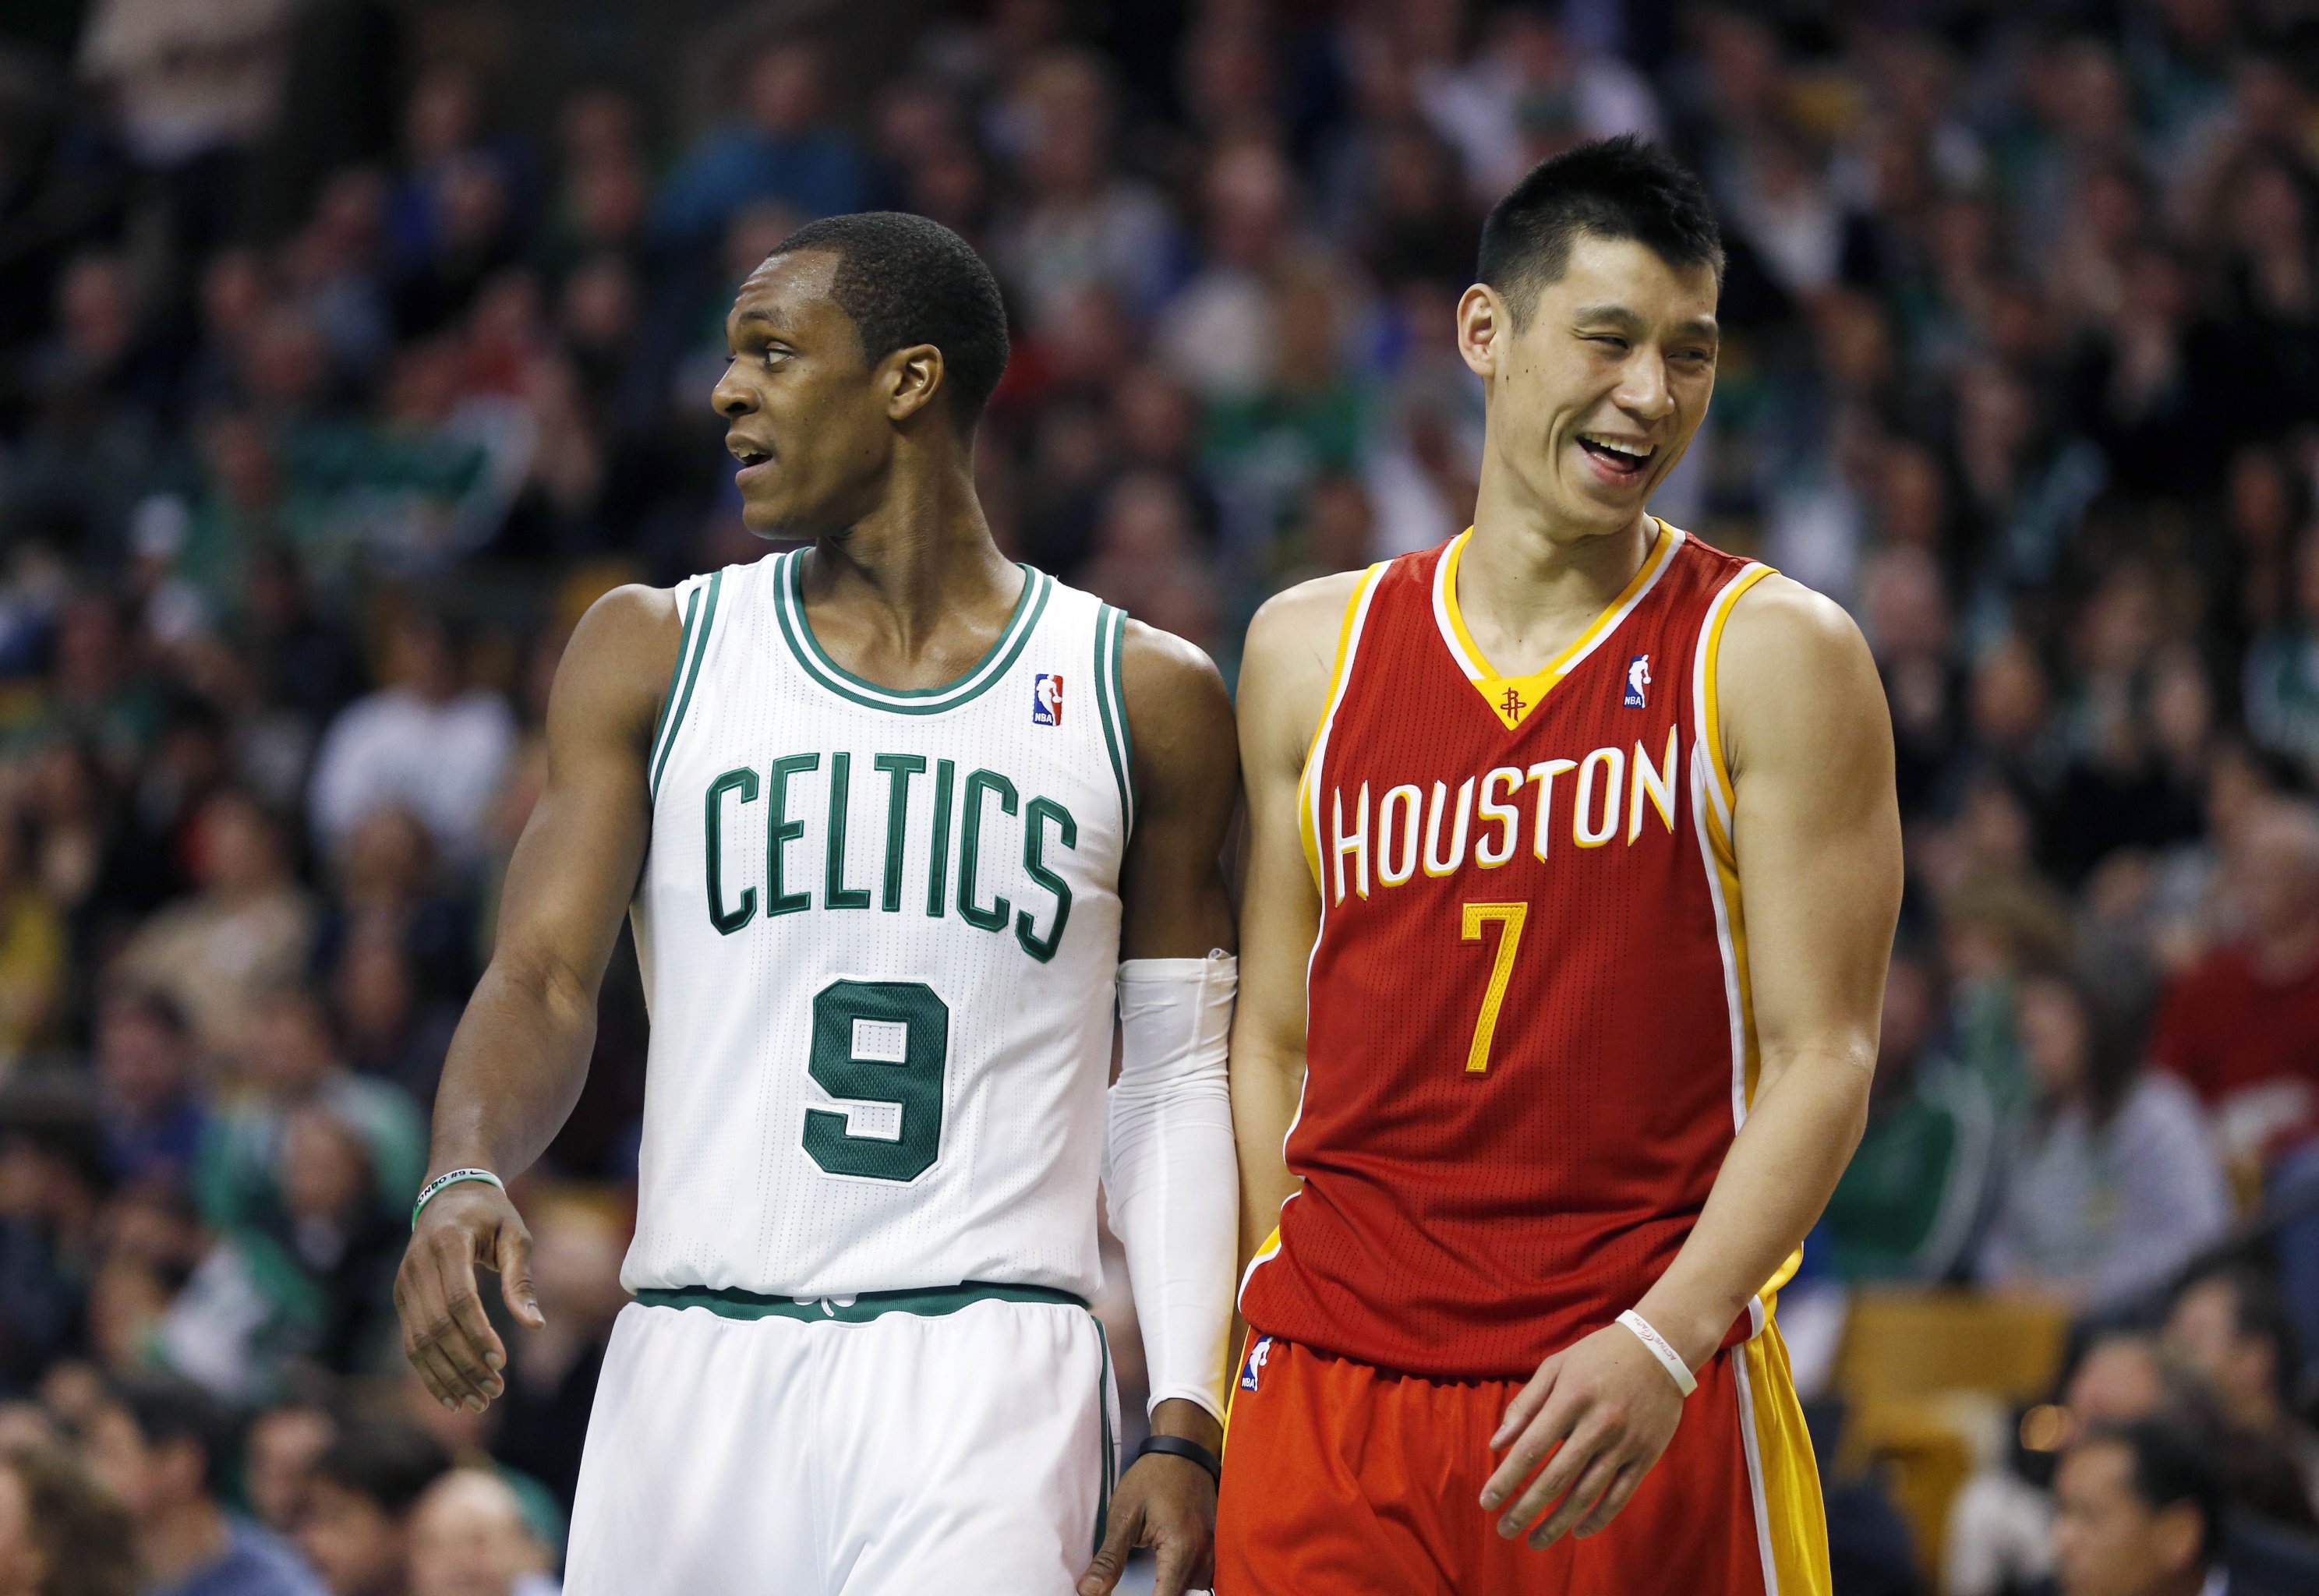 Coaching can wait: Rajon Rondo plots future, but stays in present